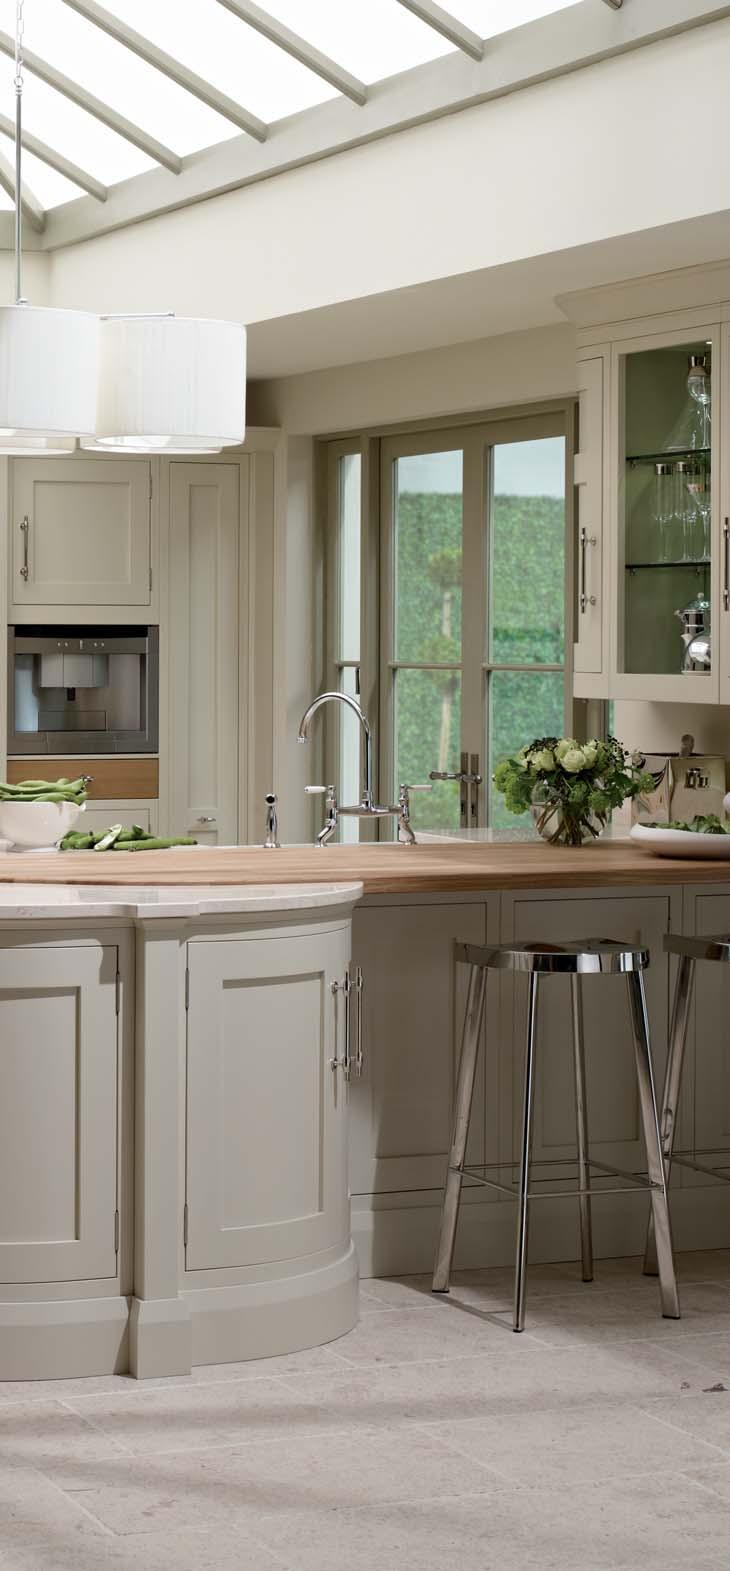 These in-frame Shaker cupboards are shown in Flint Grey and Almond, with solid brass handles and hinges in a bright nickel finish.